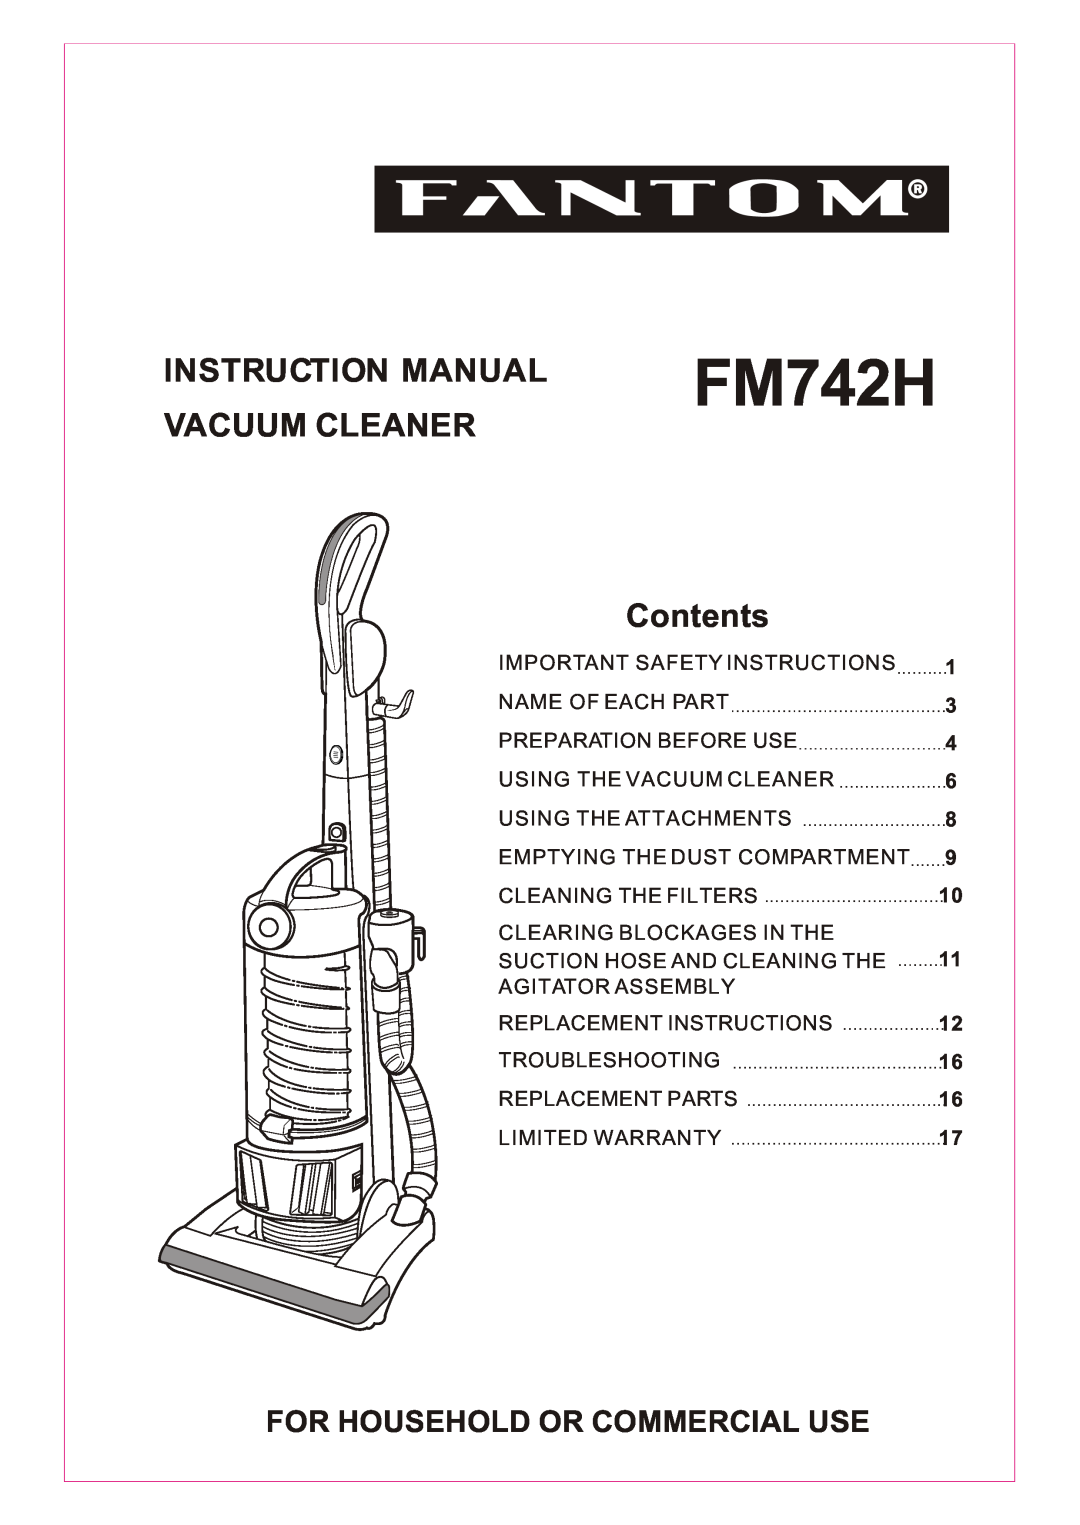 Fantom Vacuum FM742H instruction manual VACUUM CLEANER Contents, For Household Or Commercial Use 